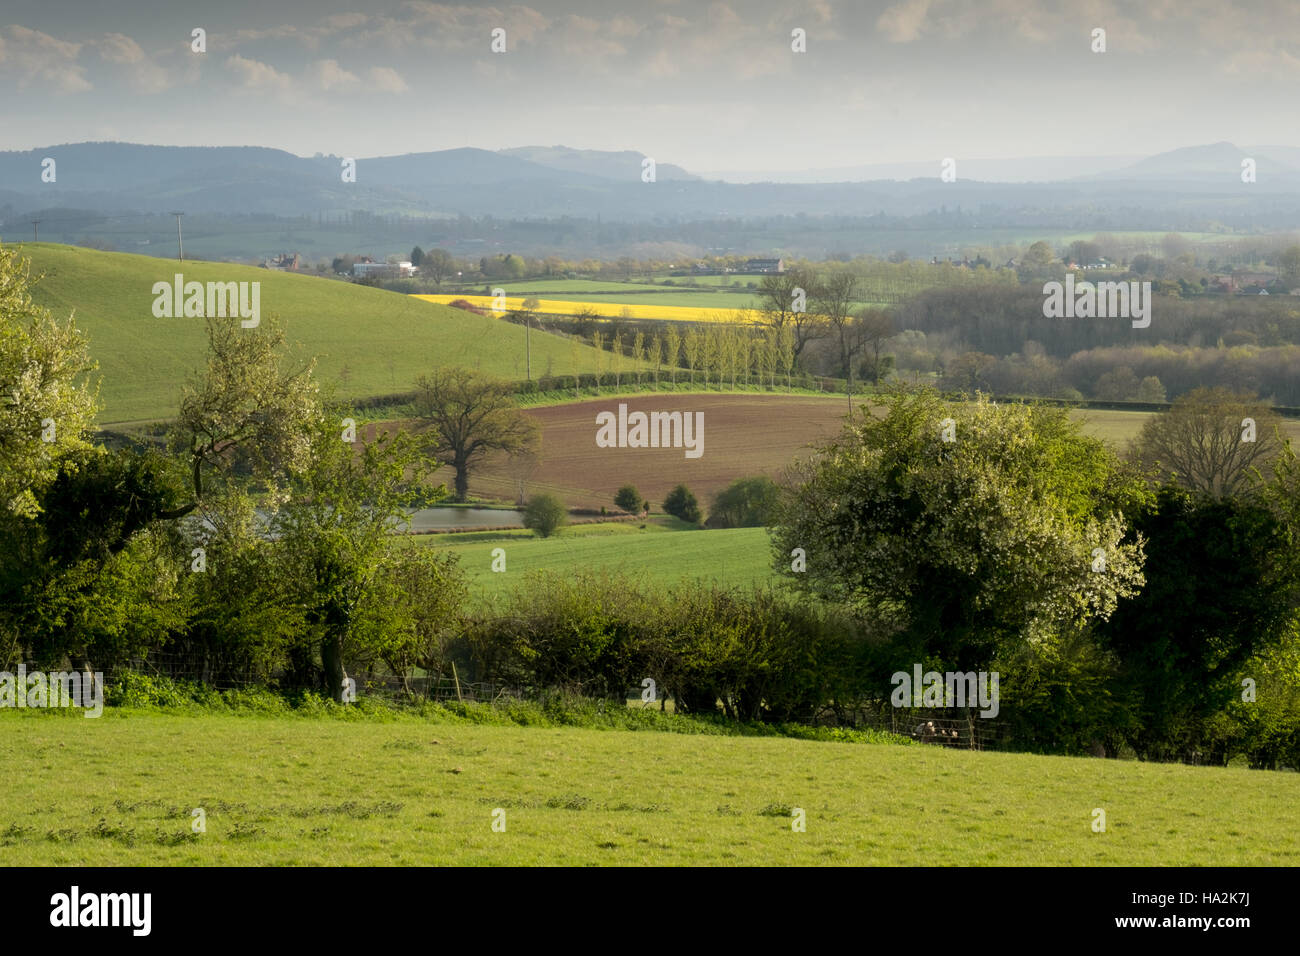 Looking over a sunlit meadow and blossoming hedgerow to rolling fields, hills and the Brecon Beacons in the far distance. 4. Stock Photo